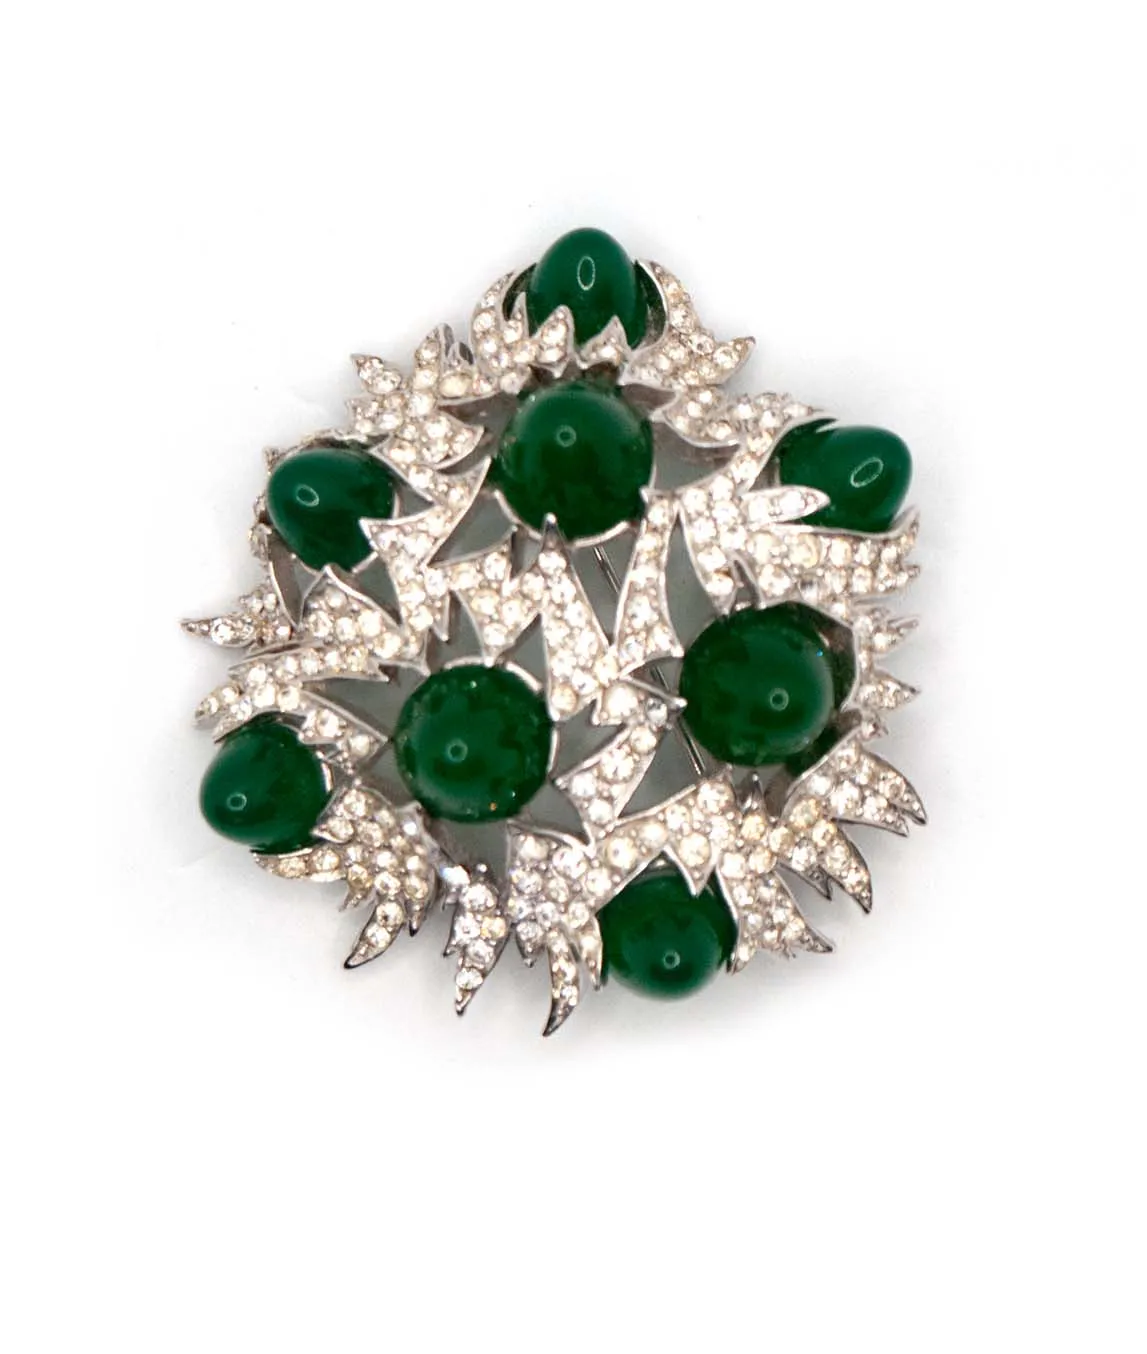 1960s Marcel Boucher brooch with pavé crystals and green bullet glass on silver